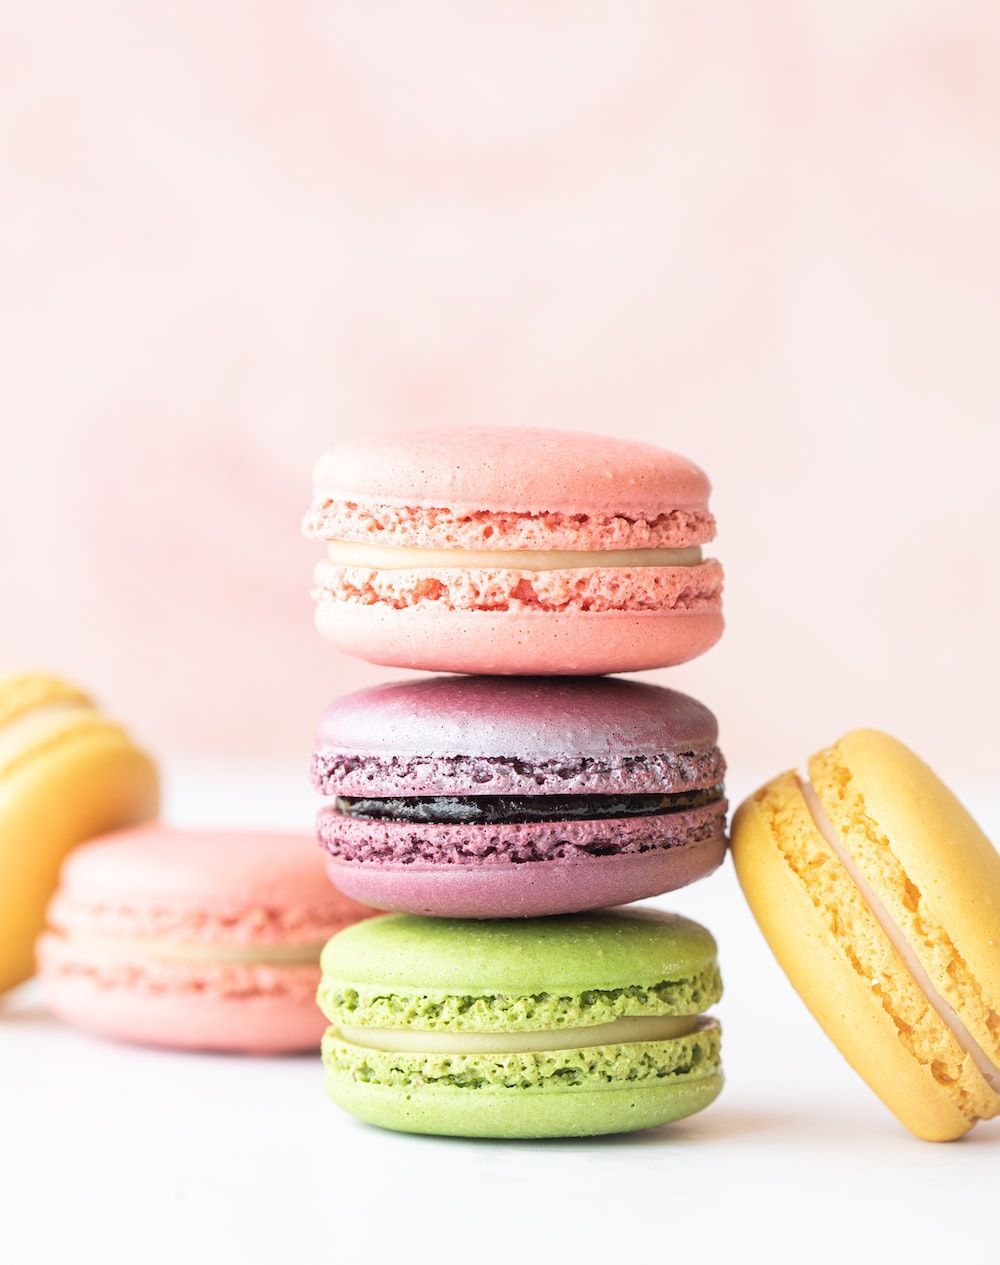 A stack of macarons on top each other - Bakery, macarons